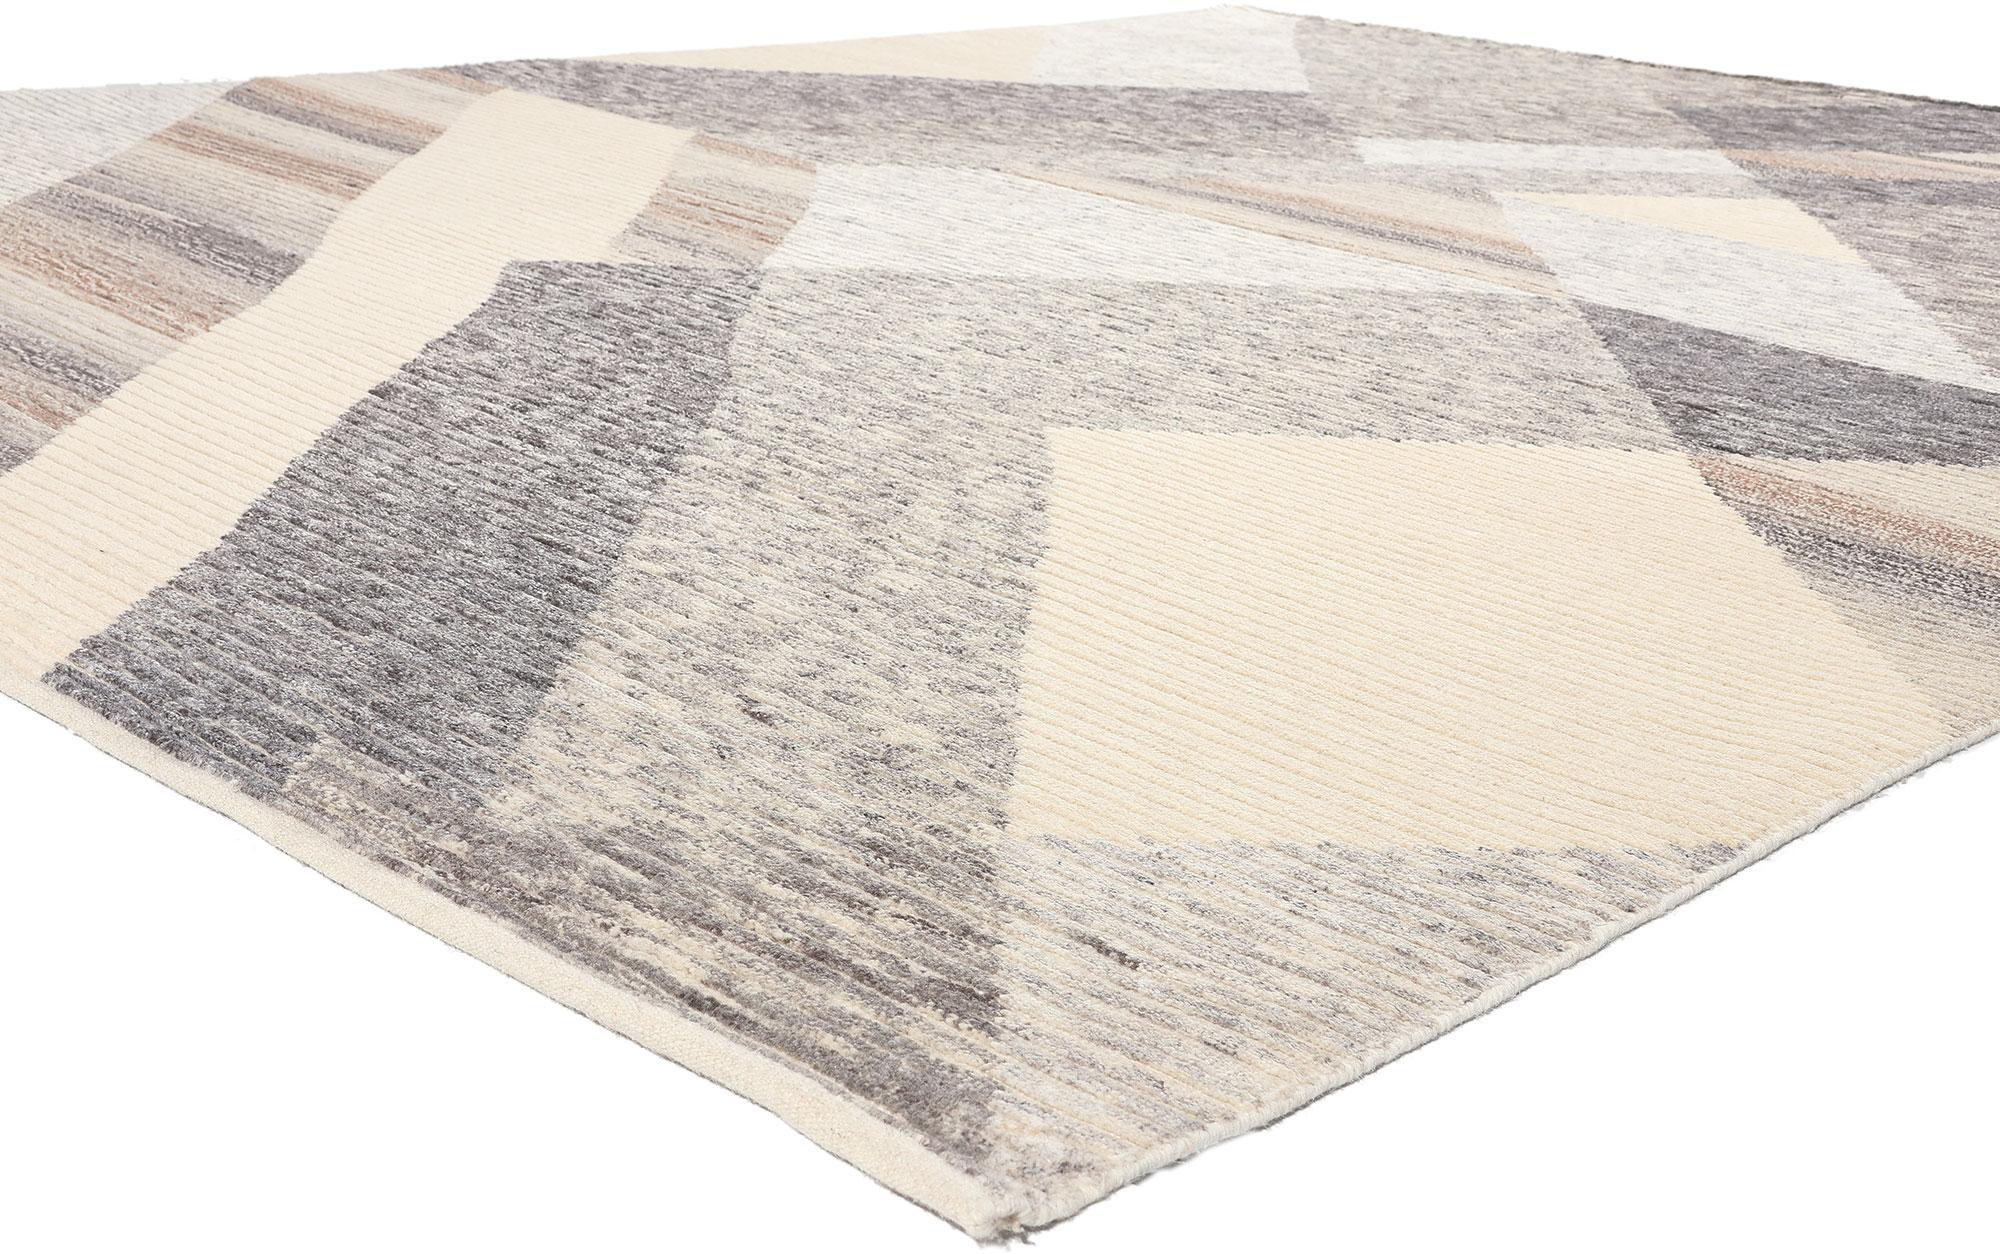 30984 Modern Abstract Moroccan Rug, 09'02 x 11'11.
Reflecting well-balanced asymmetry with incredible detail and texture, this hand knotted wool Moroccan rug is a captivating vision of woven beauty. The eye-catching cubist design and earthy hues